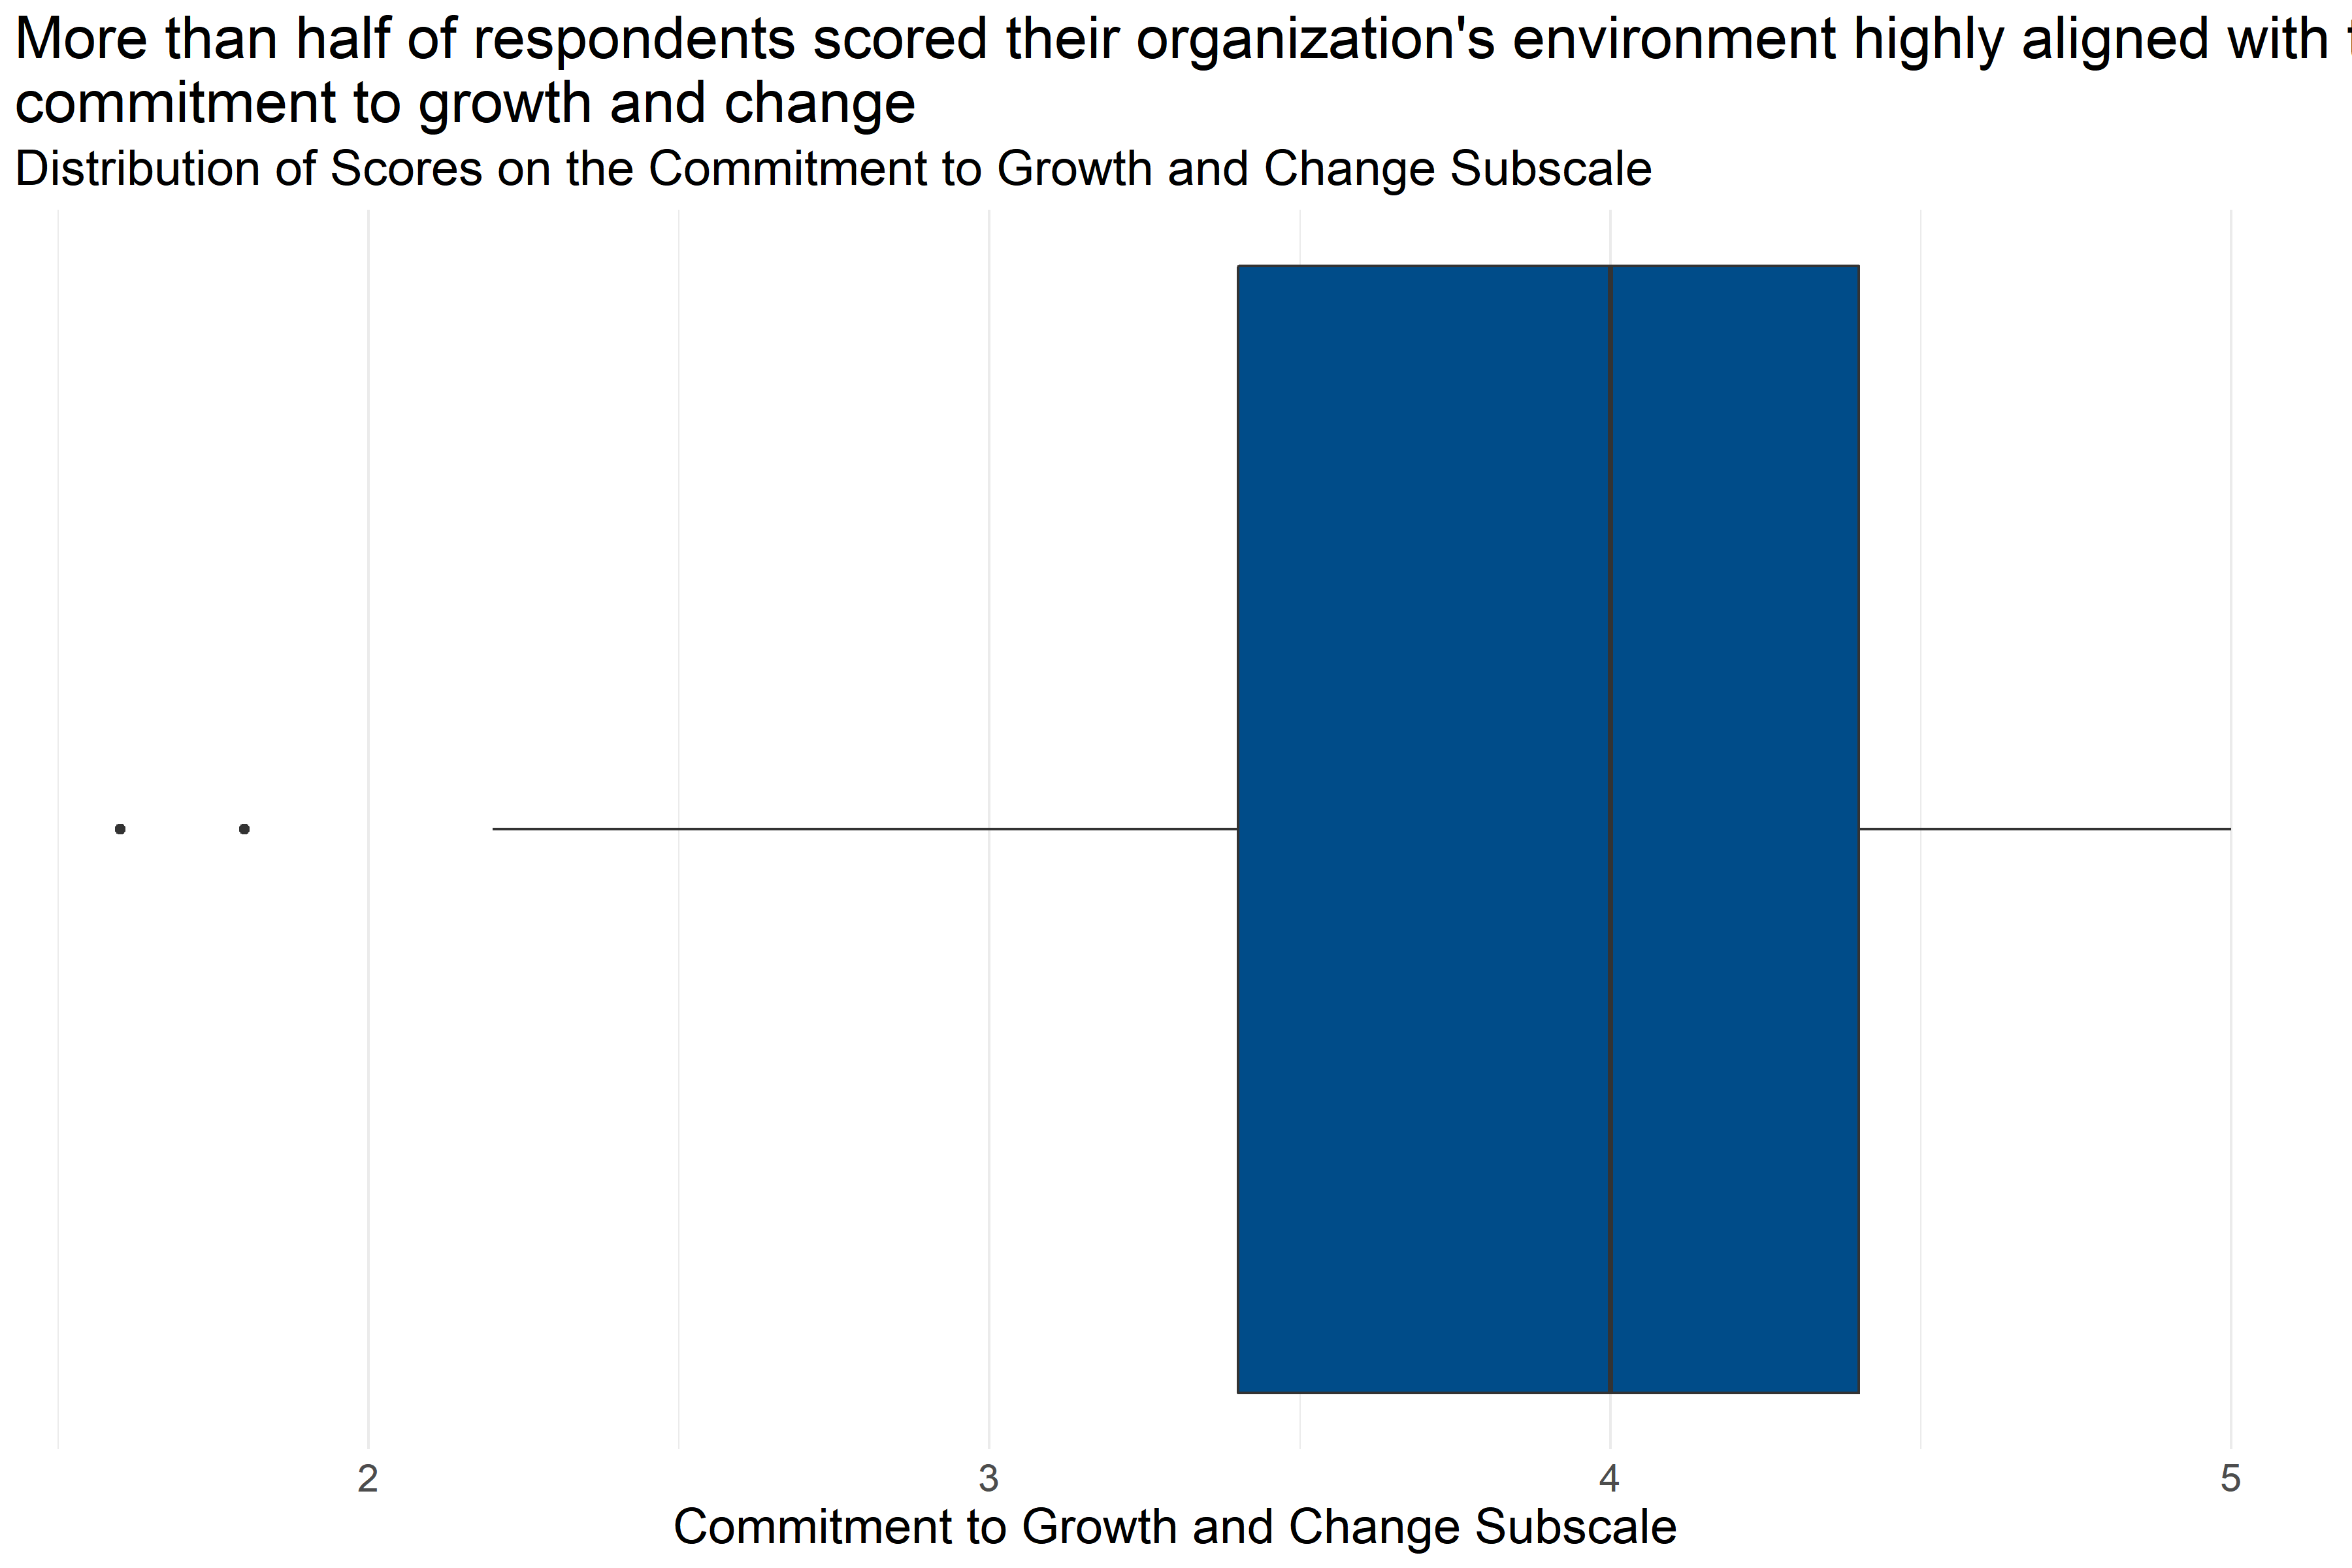 Boxplot of score distributions for Commitment to Growth and Change Subscale